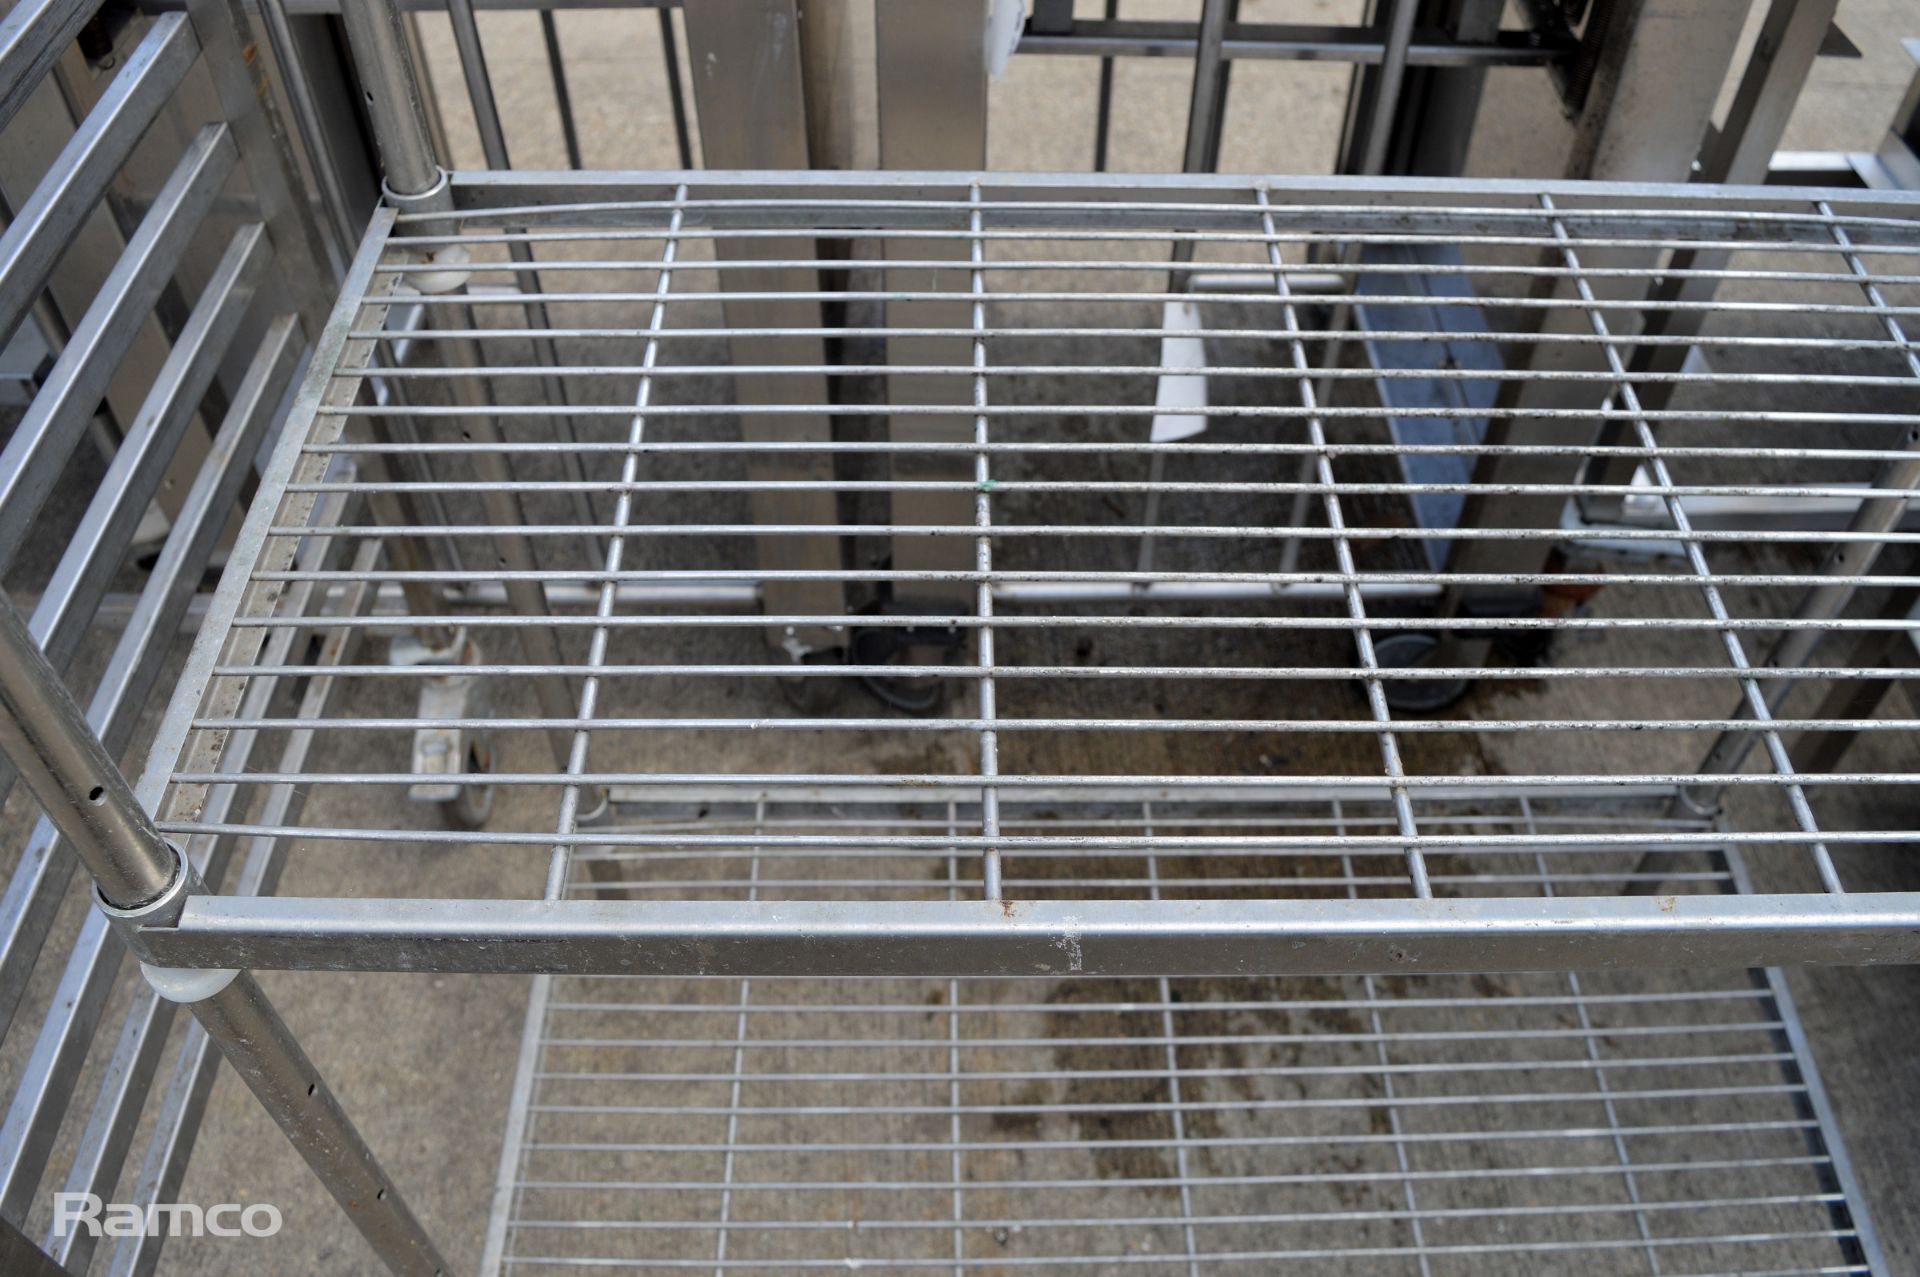 Stainless steel 4 tier wire racking L 91 X W 46 x H 185 cm - Image 4 of 4